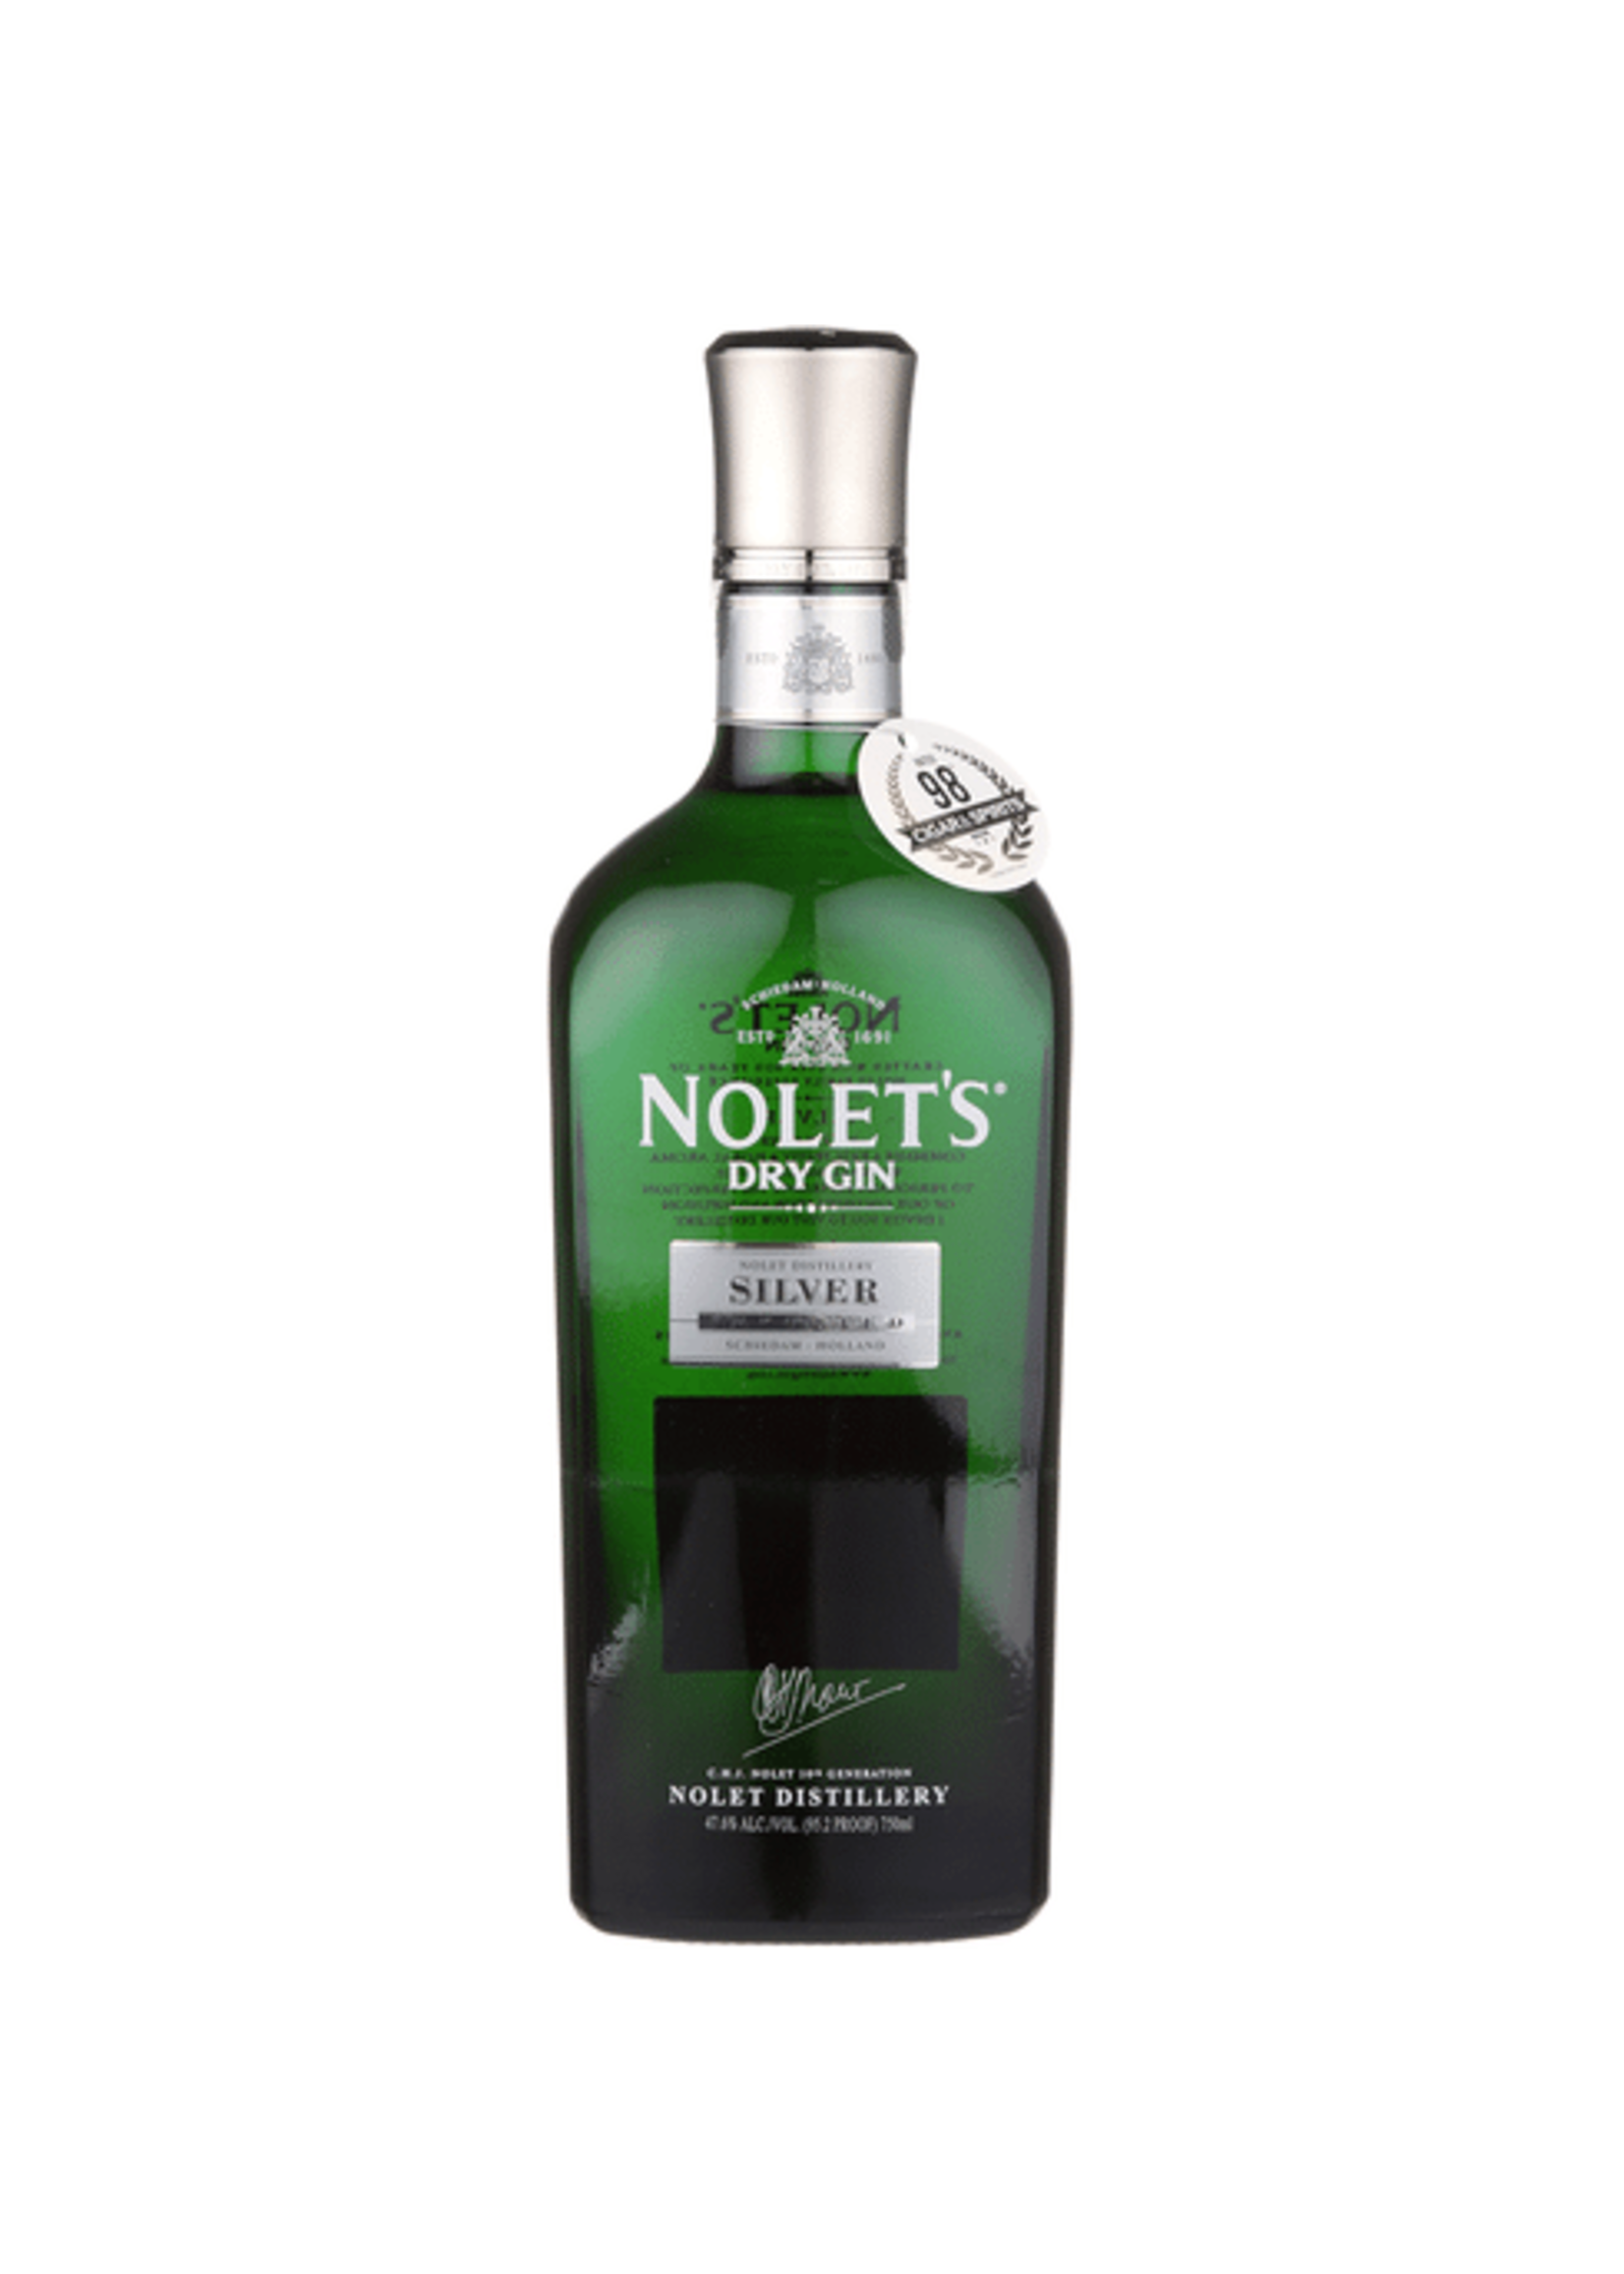 NOLET'S DRY GIN NOLET'S DRY GIN	SILVER IMPORTED  .750L